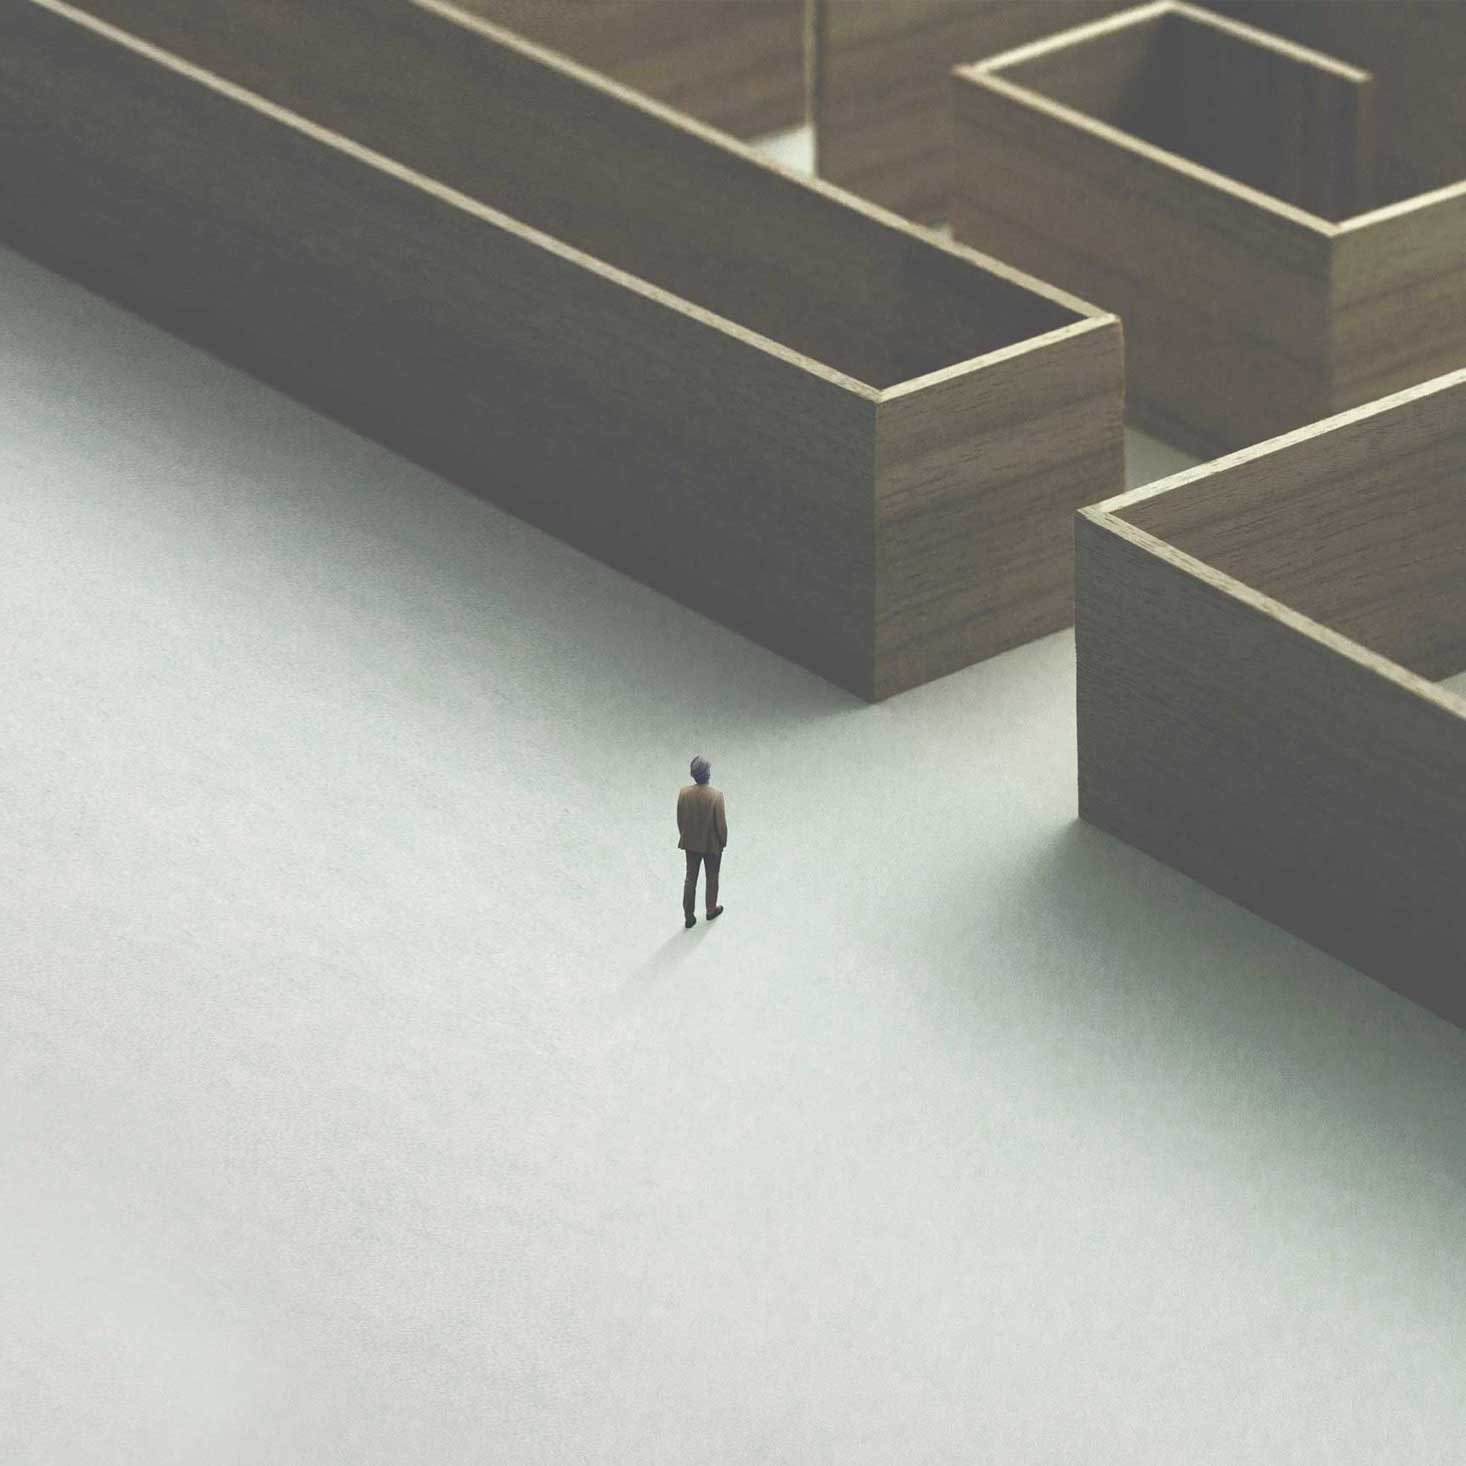 Animated man walking into a maze.